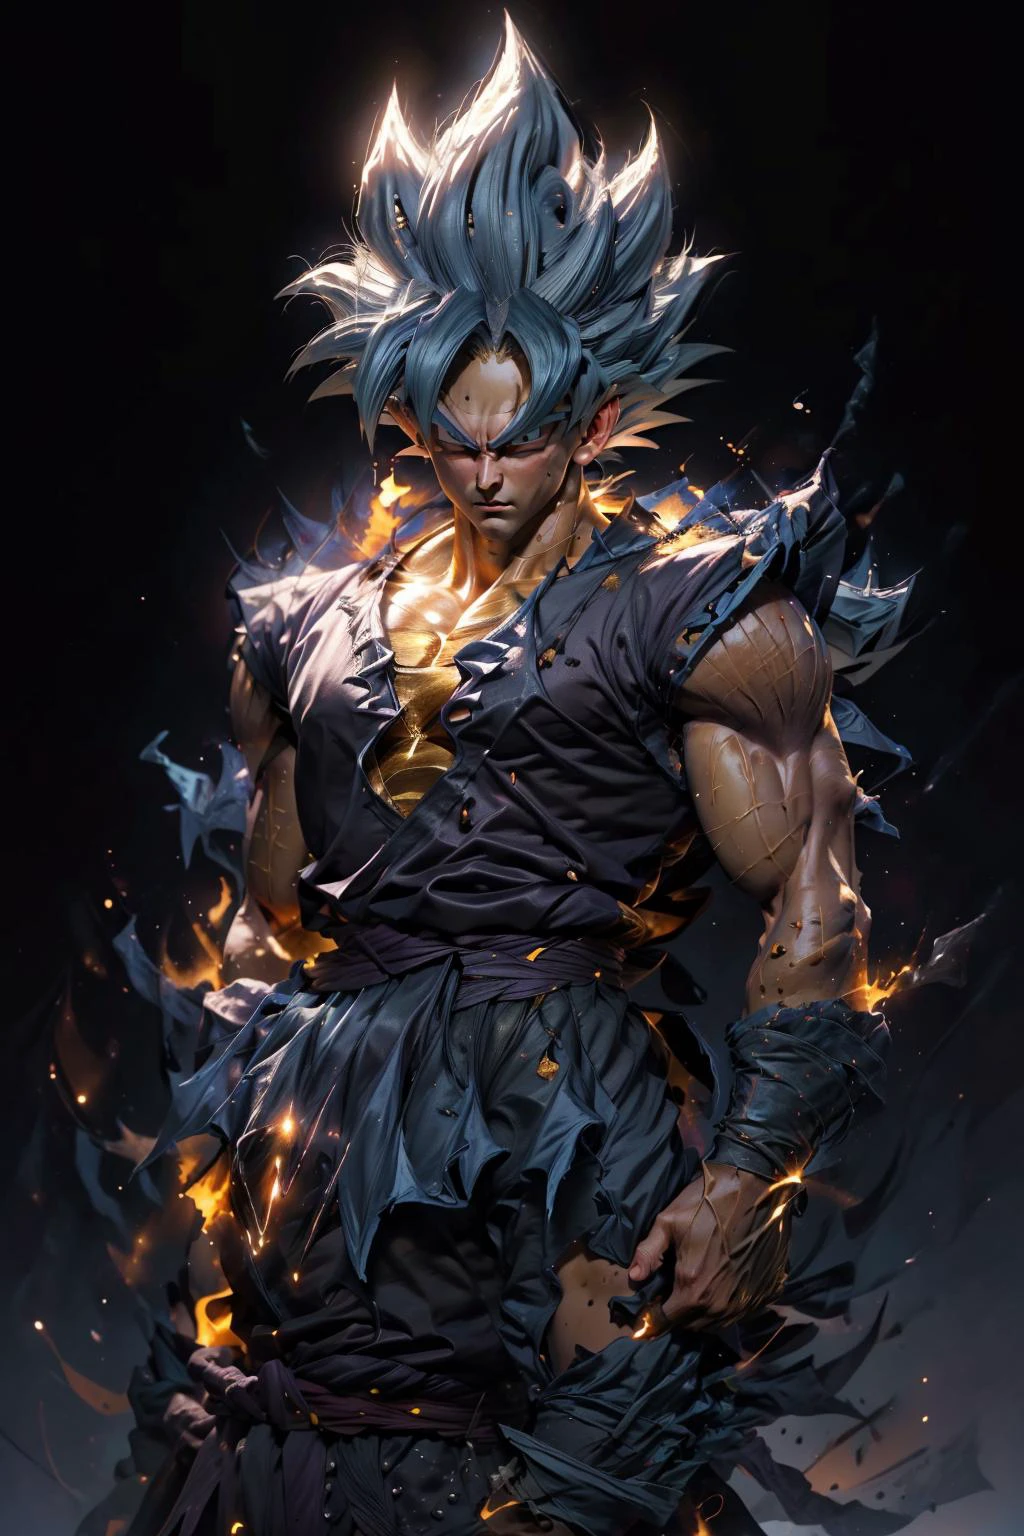 Create a detailed and hyper-realistic oil painting of Goku, the iconic warrior from the 'Dragon Ball' series, standing tall in his Super Saiyan transformation. Employ advanced oil painting techniques to achieve the utmost accuracy and beauty.
Position: Goku stands upright with his fists clenched at his sides, embodying the intensity of a warrior ready to fight.
Appearance: His long, golden-yellow hair is spiked up, reflecting the transformation to his Super Saiyan form. His eyes are stark white, filled with determination.
Aura: Surrounding Goku is a vibrant, yellow aura, symbolizing his immense power. This aura should be painted with layered glazes, allowing for depth and luminosity.
Electricity: Crackling around him are electric sparks. This should be captured with precise, fluid brushstrokes, creating a lifelike sense of movement and energy.
Facial Expression: His face is determined and focused, yet calm. The rendering of his facial features should be meticulous, capturing every nuance of his expression.
Musculature: Goku's muscular form should be depicted with careful attention to anatomical accuracy. Use a combination of glazing and impasto techniques to give the flesh a three-dimensional, tangible quality.
Clothing: He is dressed in his traditional orange fighting gi, torn and battle-worn. The fabric should be painted with finesse, capturing the play of light and shadow on the folds.
Background: Choose a simple, atmospheric background that does not distract from the central figure but complements and enhances the overall composition.
Techniques: Utilize a combination of techniques, such as layering, glazing, impasto, and scumbling, to achieve a rich and complex texture. The interplay of light and shadow should be carefully managed to convey a realistic three-dimensional effect.
Palette: Employ a carefully selected palette that complements Goku's Super Saiyan form, with golden yellows, deep shadows, and brilliant highlights.
The overall painting should not only depict Goku in his Super Saiyan form but also capture the essence of his character and the intensity of his power. It should be a masterpiece that any 'Dragon Ball' fan would instantly recognize and appreciate
(realistic:1.2), (realism), (masterpiece:1.2), (ultra detailed), (best quality), intricate, cinematic lighting, comprehensive cinematic, portrait photography, magical photography, (gradients), colorful, detailed landscape, cinematic bloom, 
 